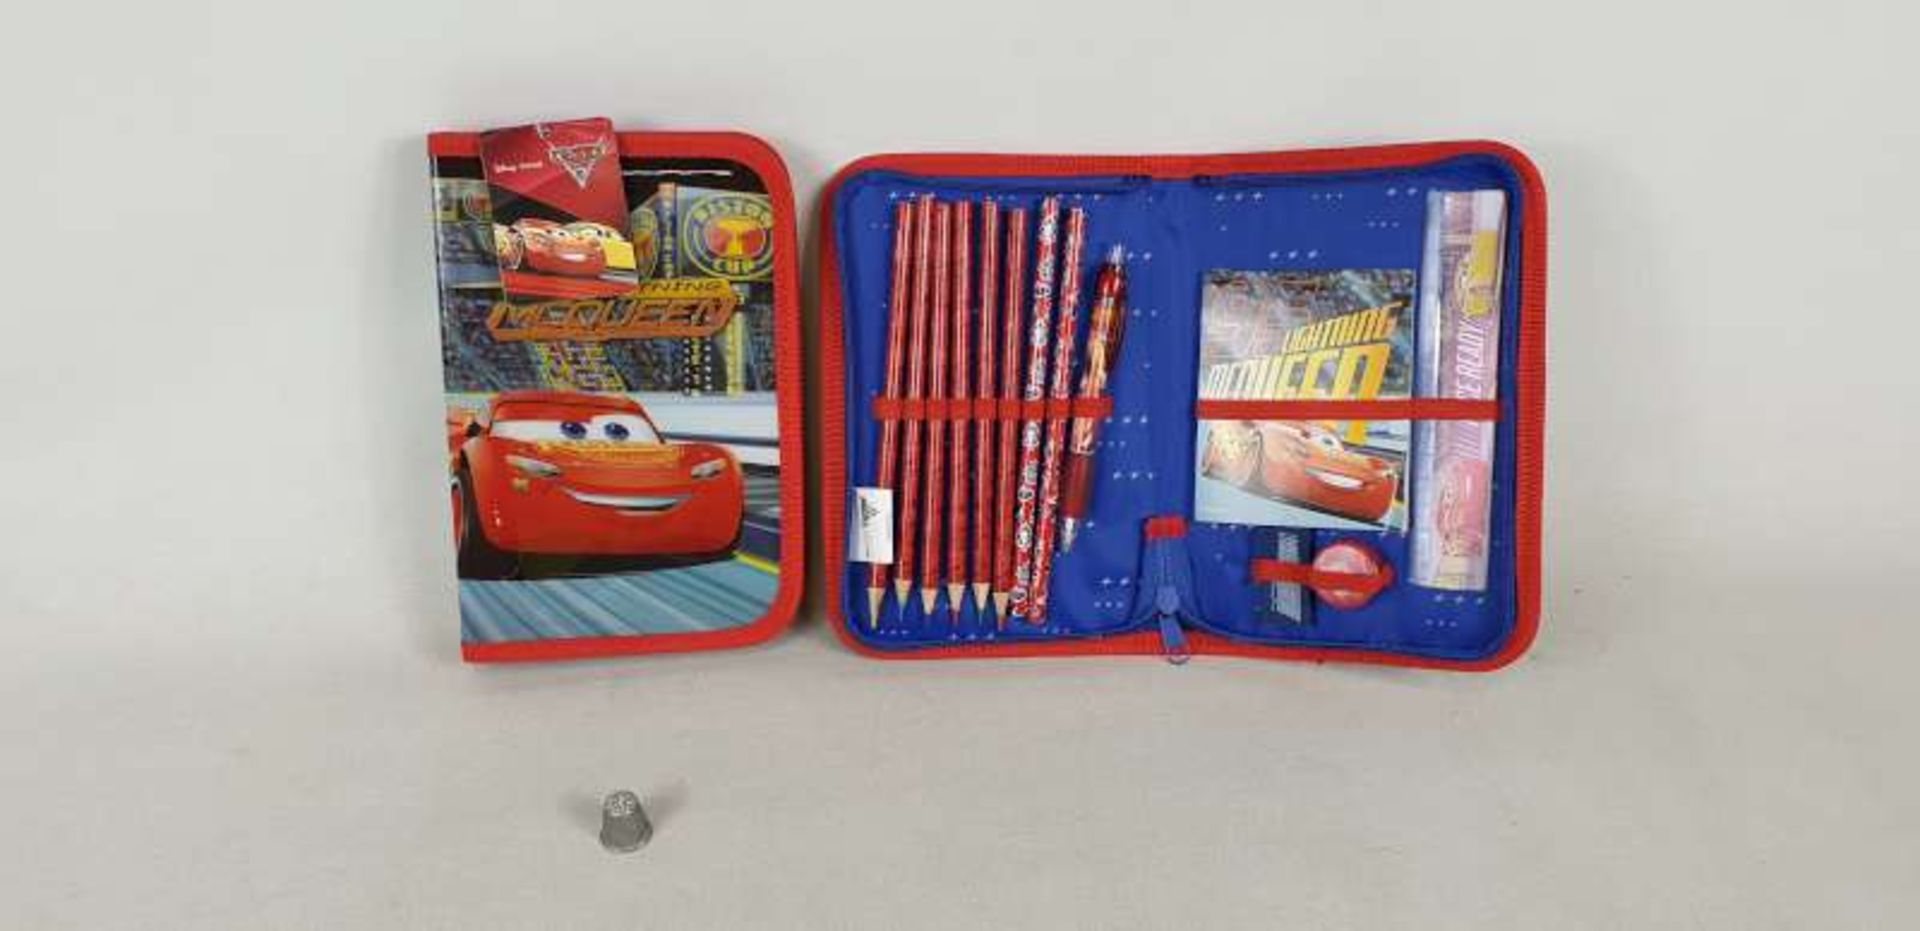 48 X DISNEY PIXAR CARS 3 FILLED PENCIL CASES IN 2 BOXES